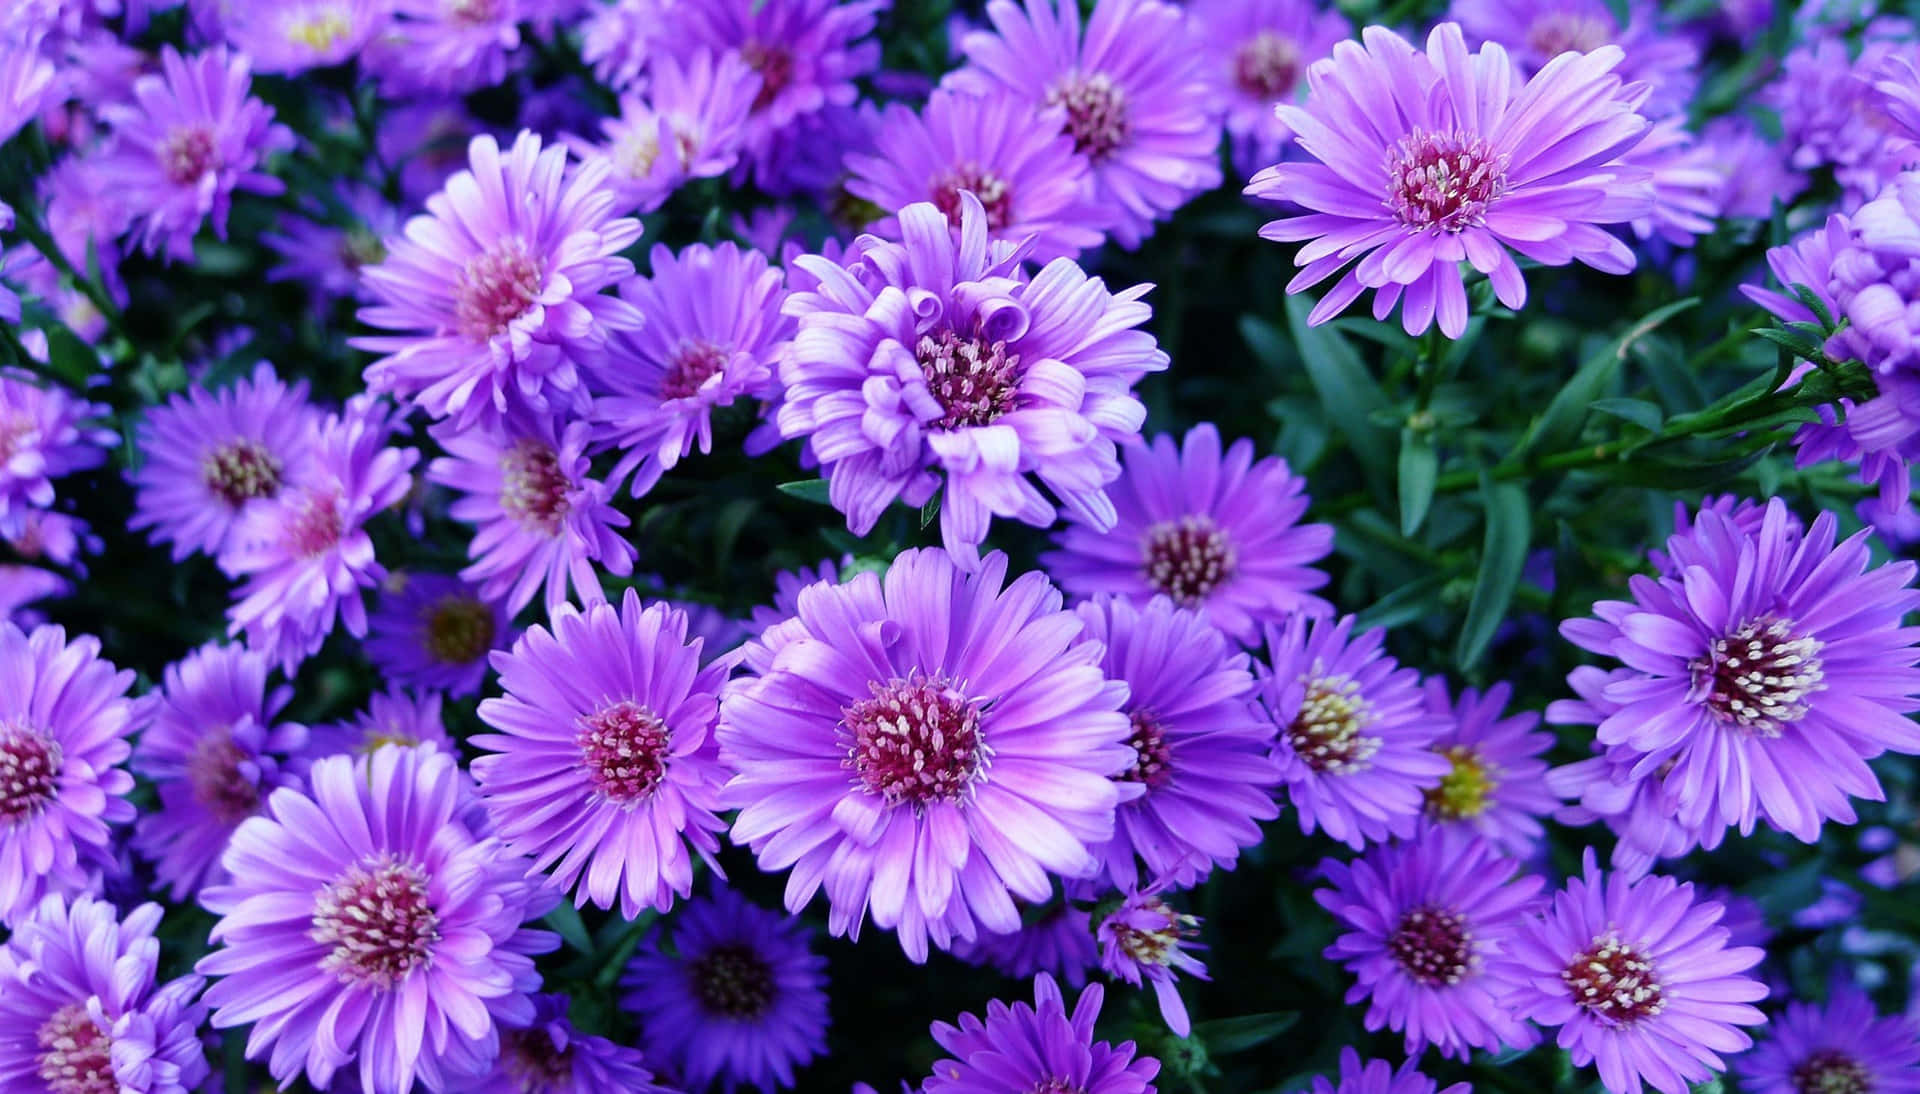 Estetiskdaisy Afrikansk Lila (for A Computer Or Mobile Wallpaper Featuring A Purple African Daisy) Wallpaper